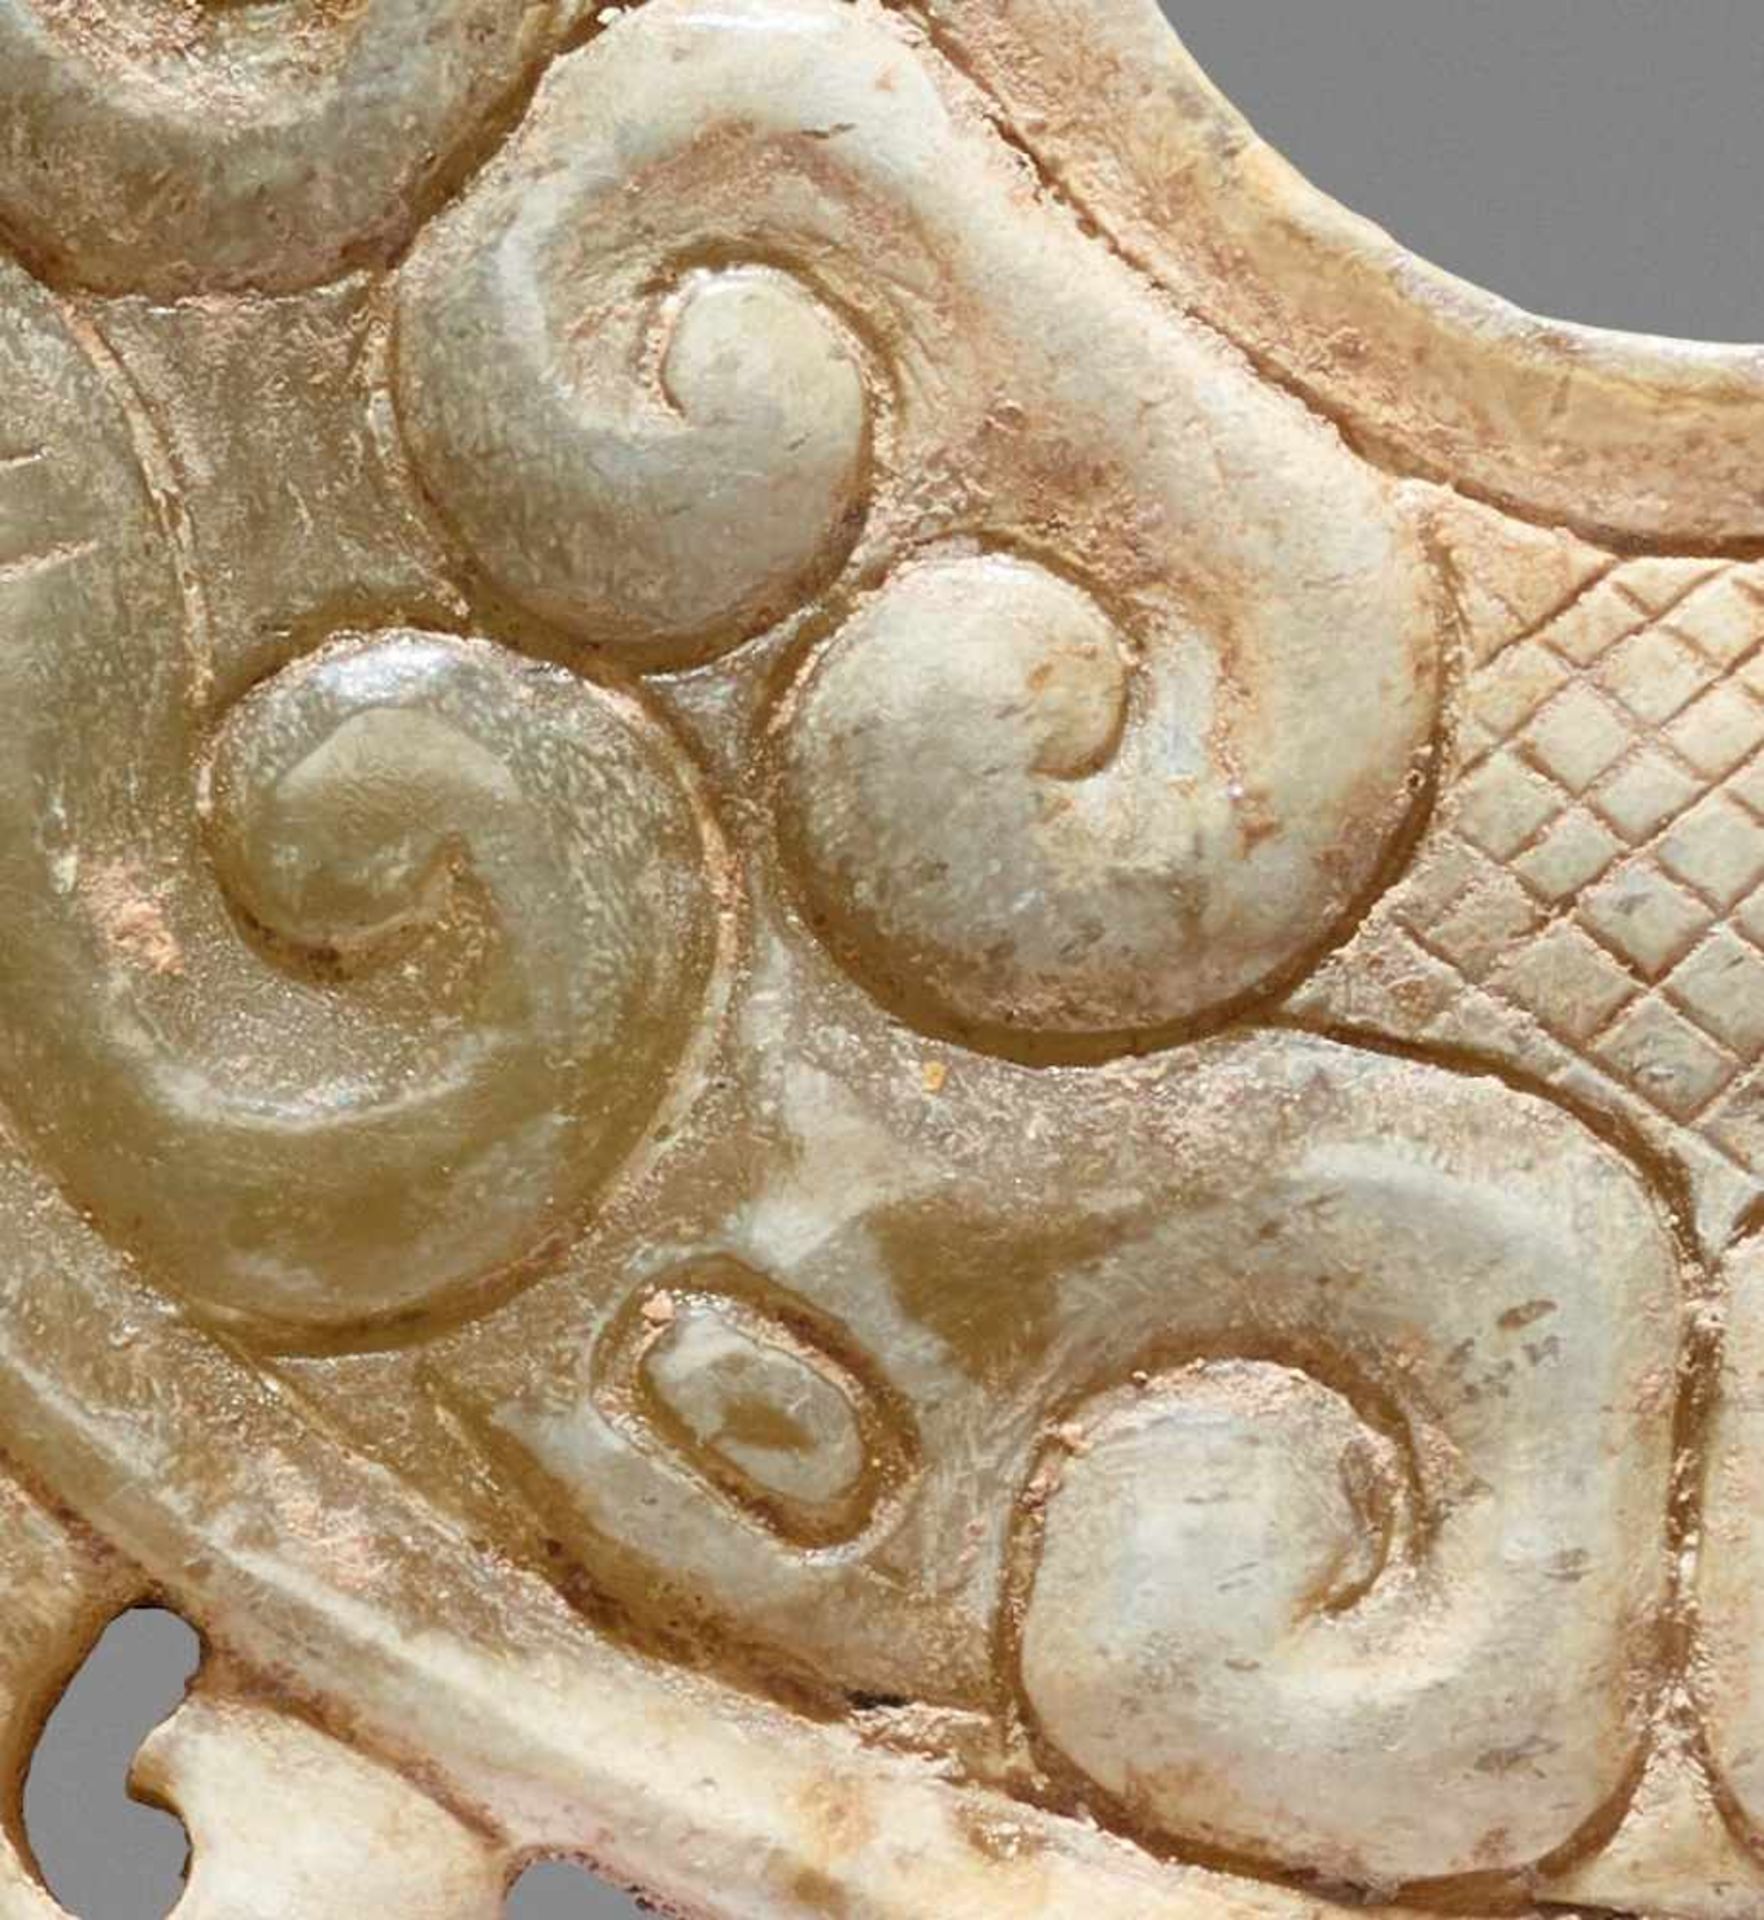 AN ATTRACTIVE SMALL DISC ORNAMENT EMBELLISHED WITH OPENWORK PHOENIXES ON TOP Jade, China. Eastern - Image 6 of 6